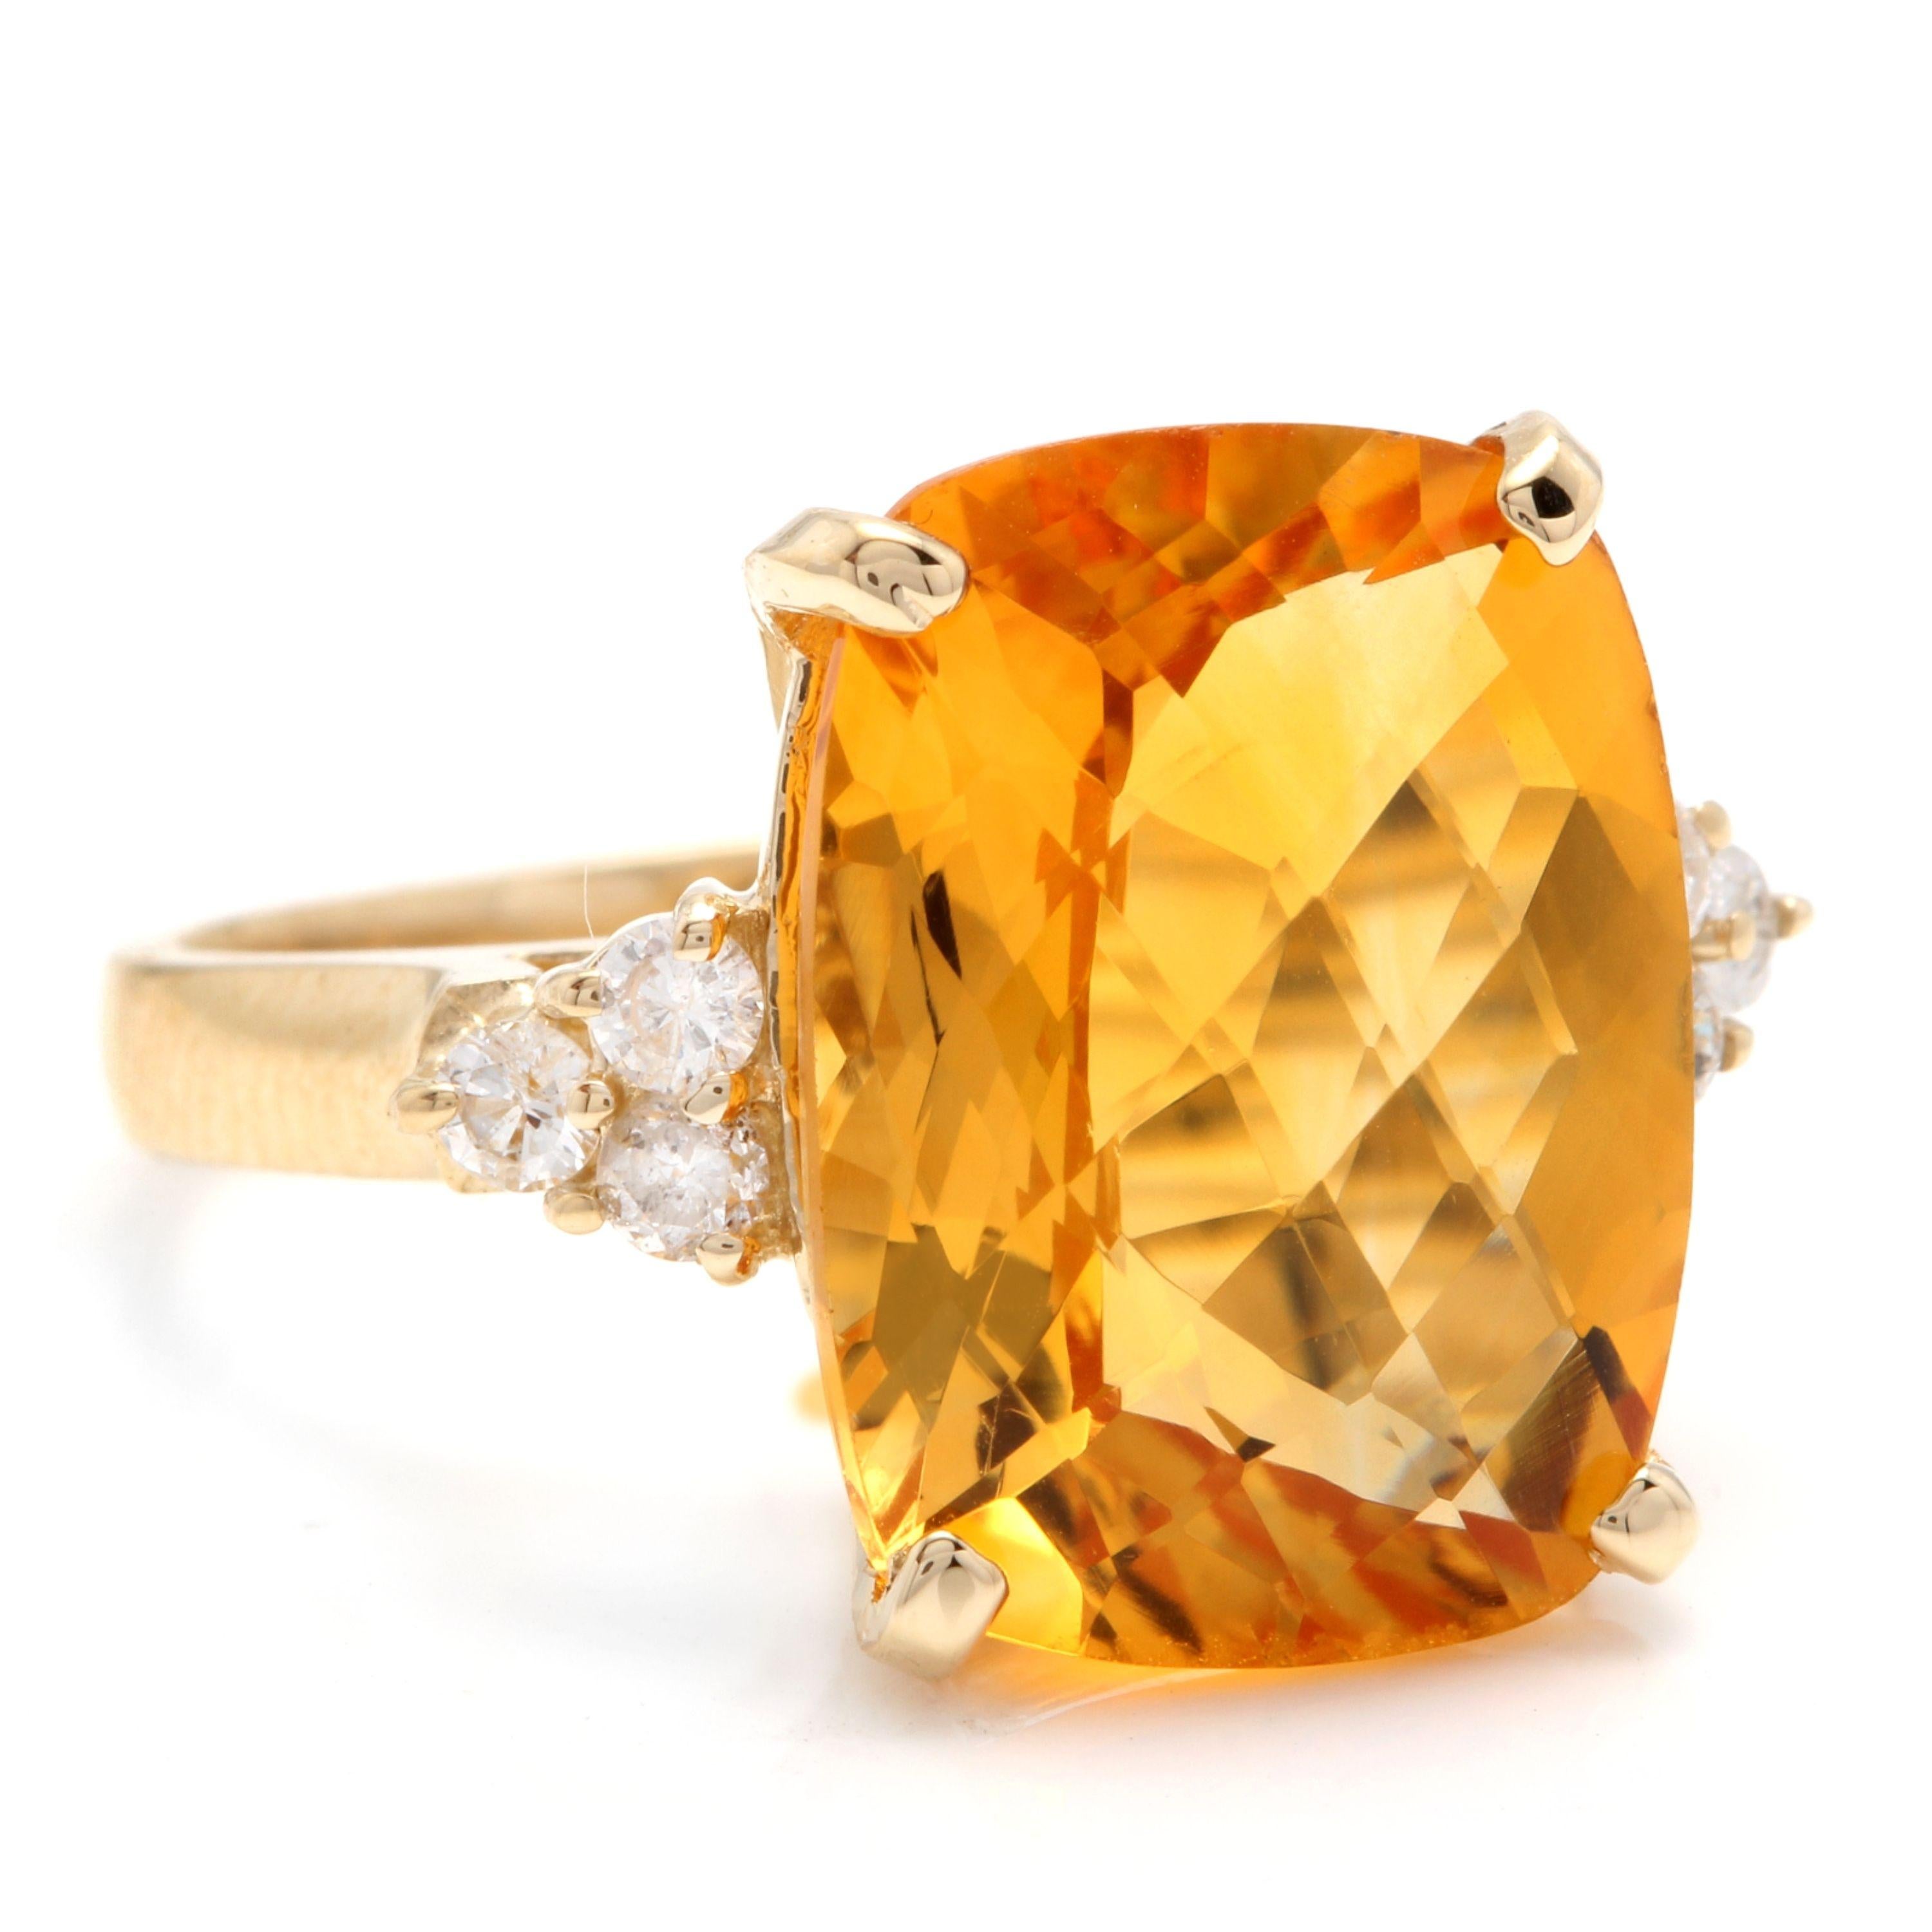 9.35 Carats Natural Very Nice Looking Citrine and Diamond 14K Solid Yellow Gold Ring

Total Natural Cushion Citrine Weight is: Approx. 9.00 Carats

Citrine Measures: Approx. 16.00 x 12.00mm

Natural Round Diamonds Weight: Approx. 0.35 Carats (color